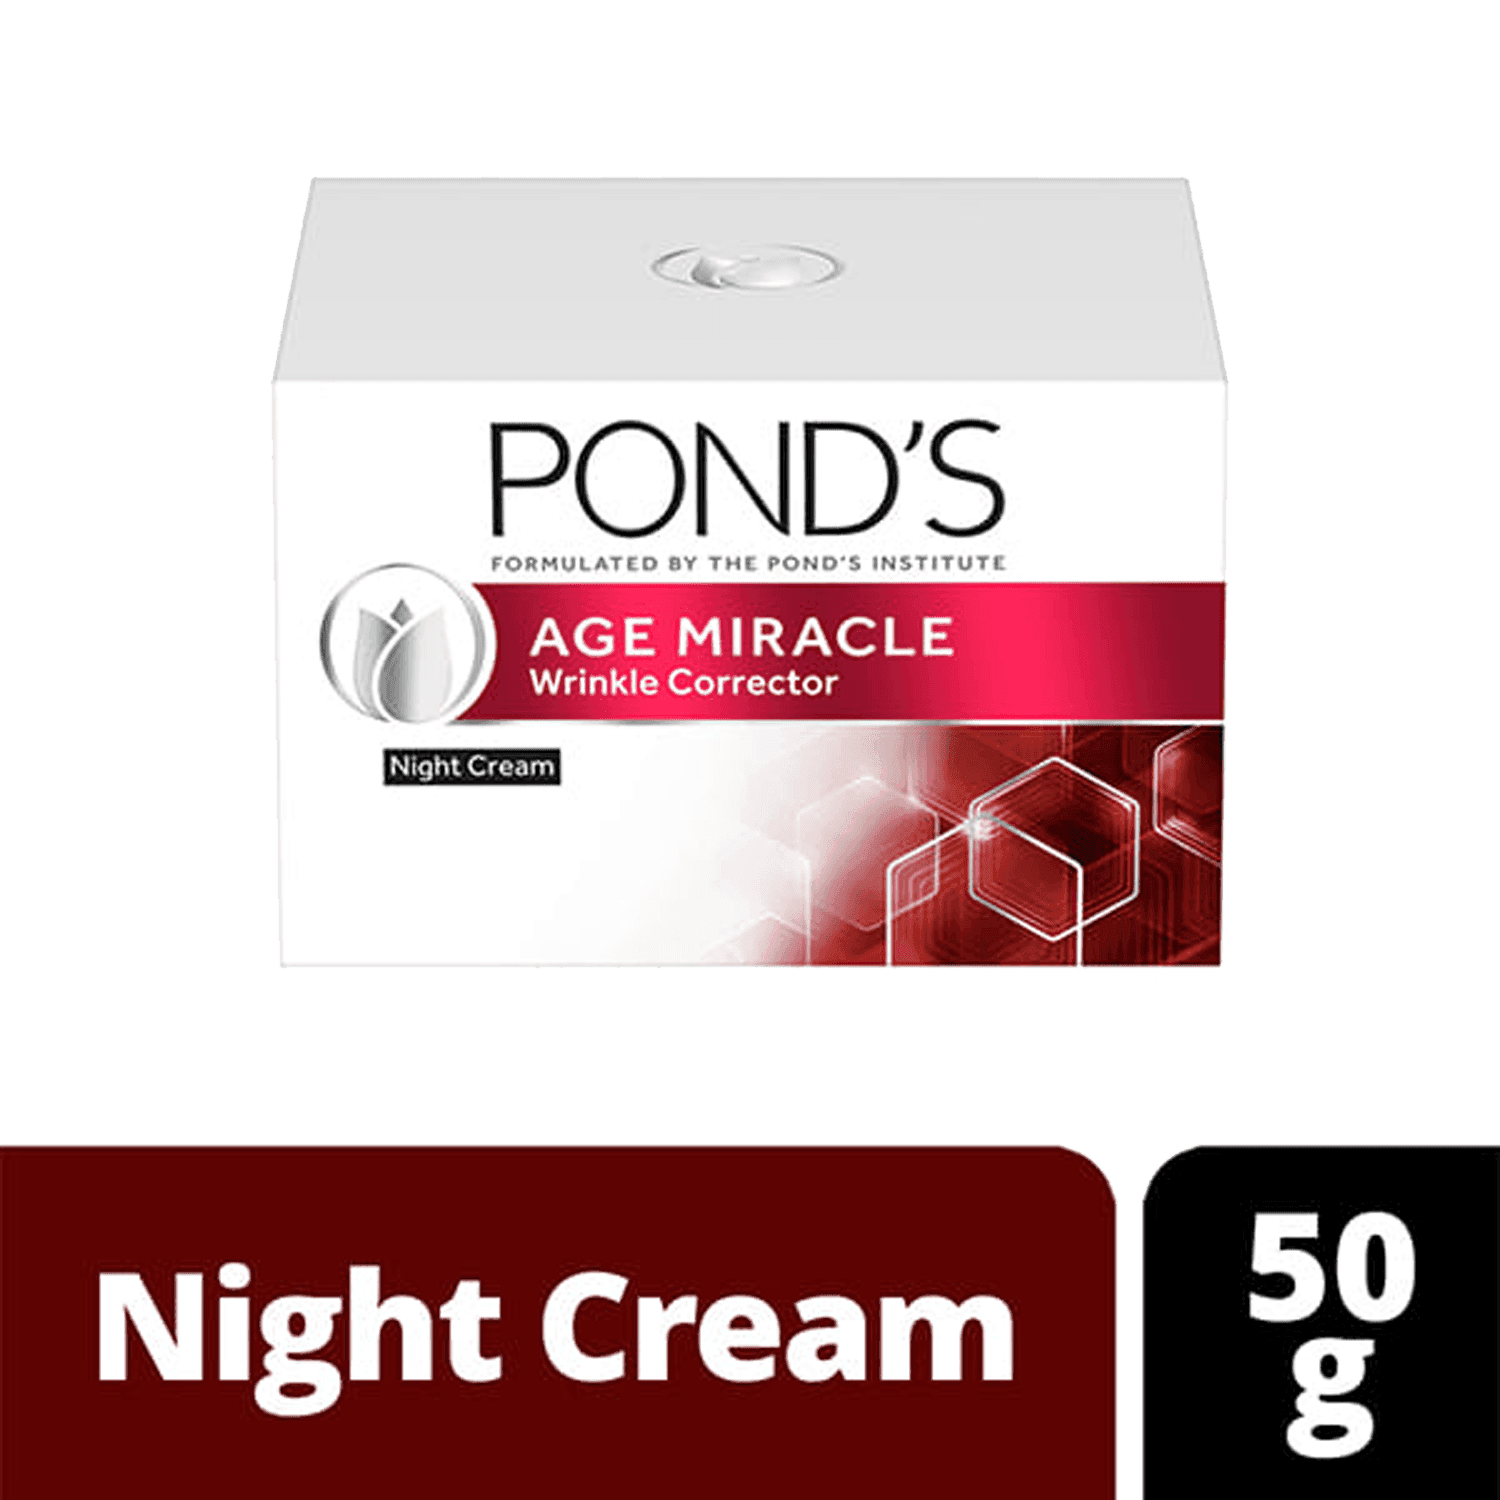 pond's-age-miracle-wrinkle-corrector-night-cream-(50g)